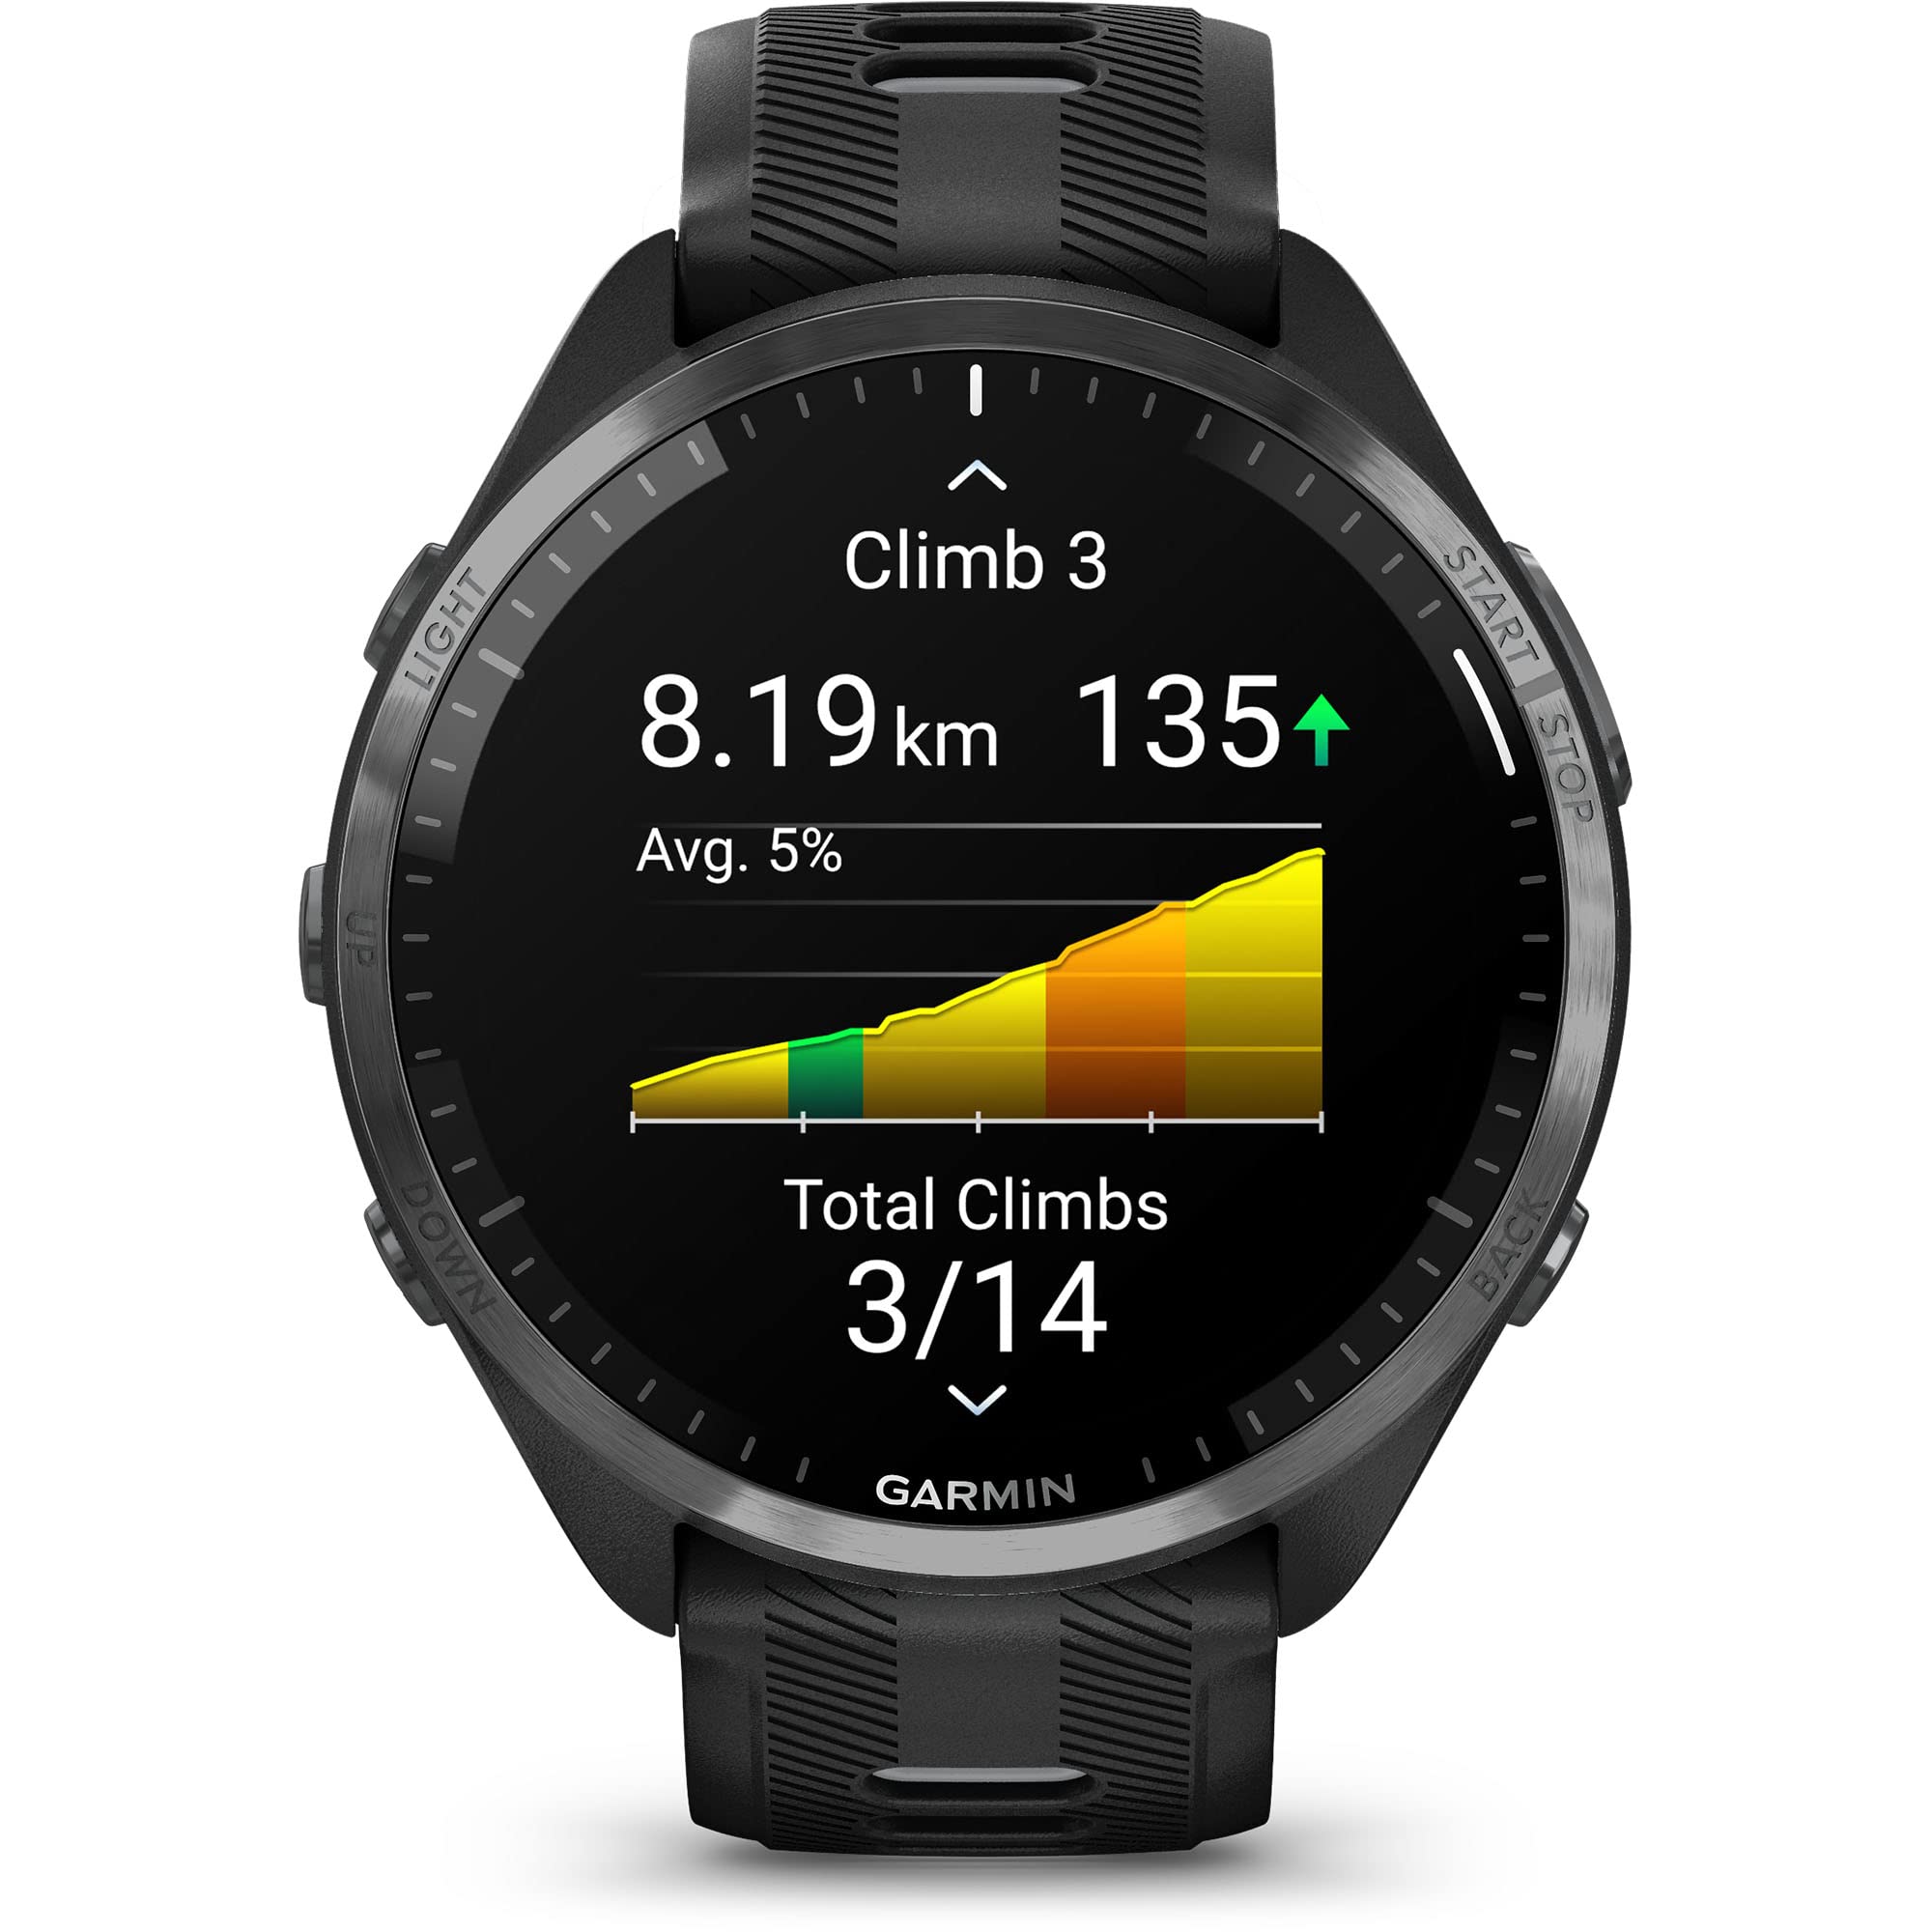 Garmin Forerunner® 965 Running Smartwatch, Colorful AMOLED Display, Training Metrics and Recovery Insights, Black and Powder Gray - image 4 of 5